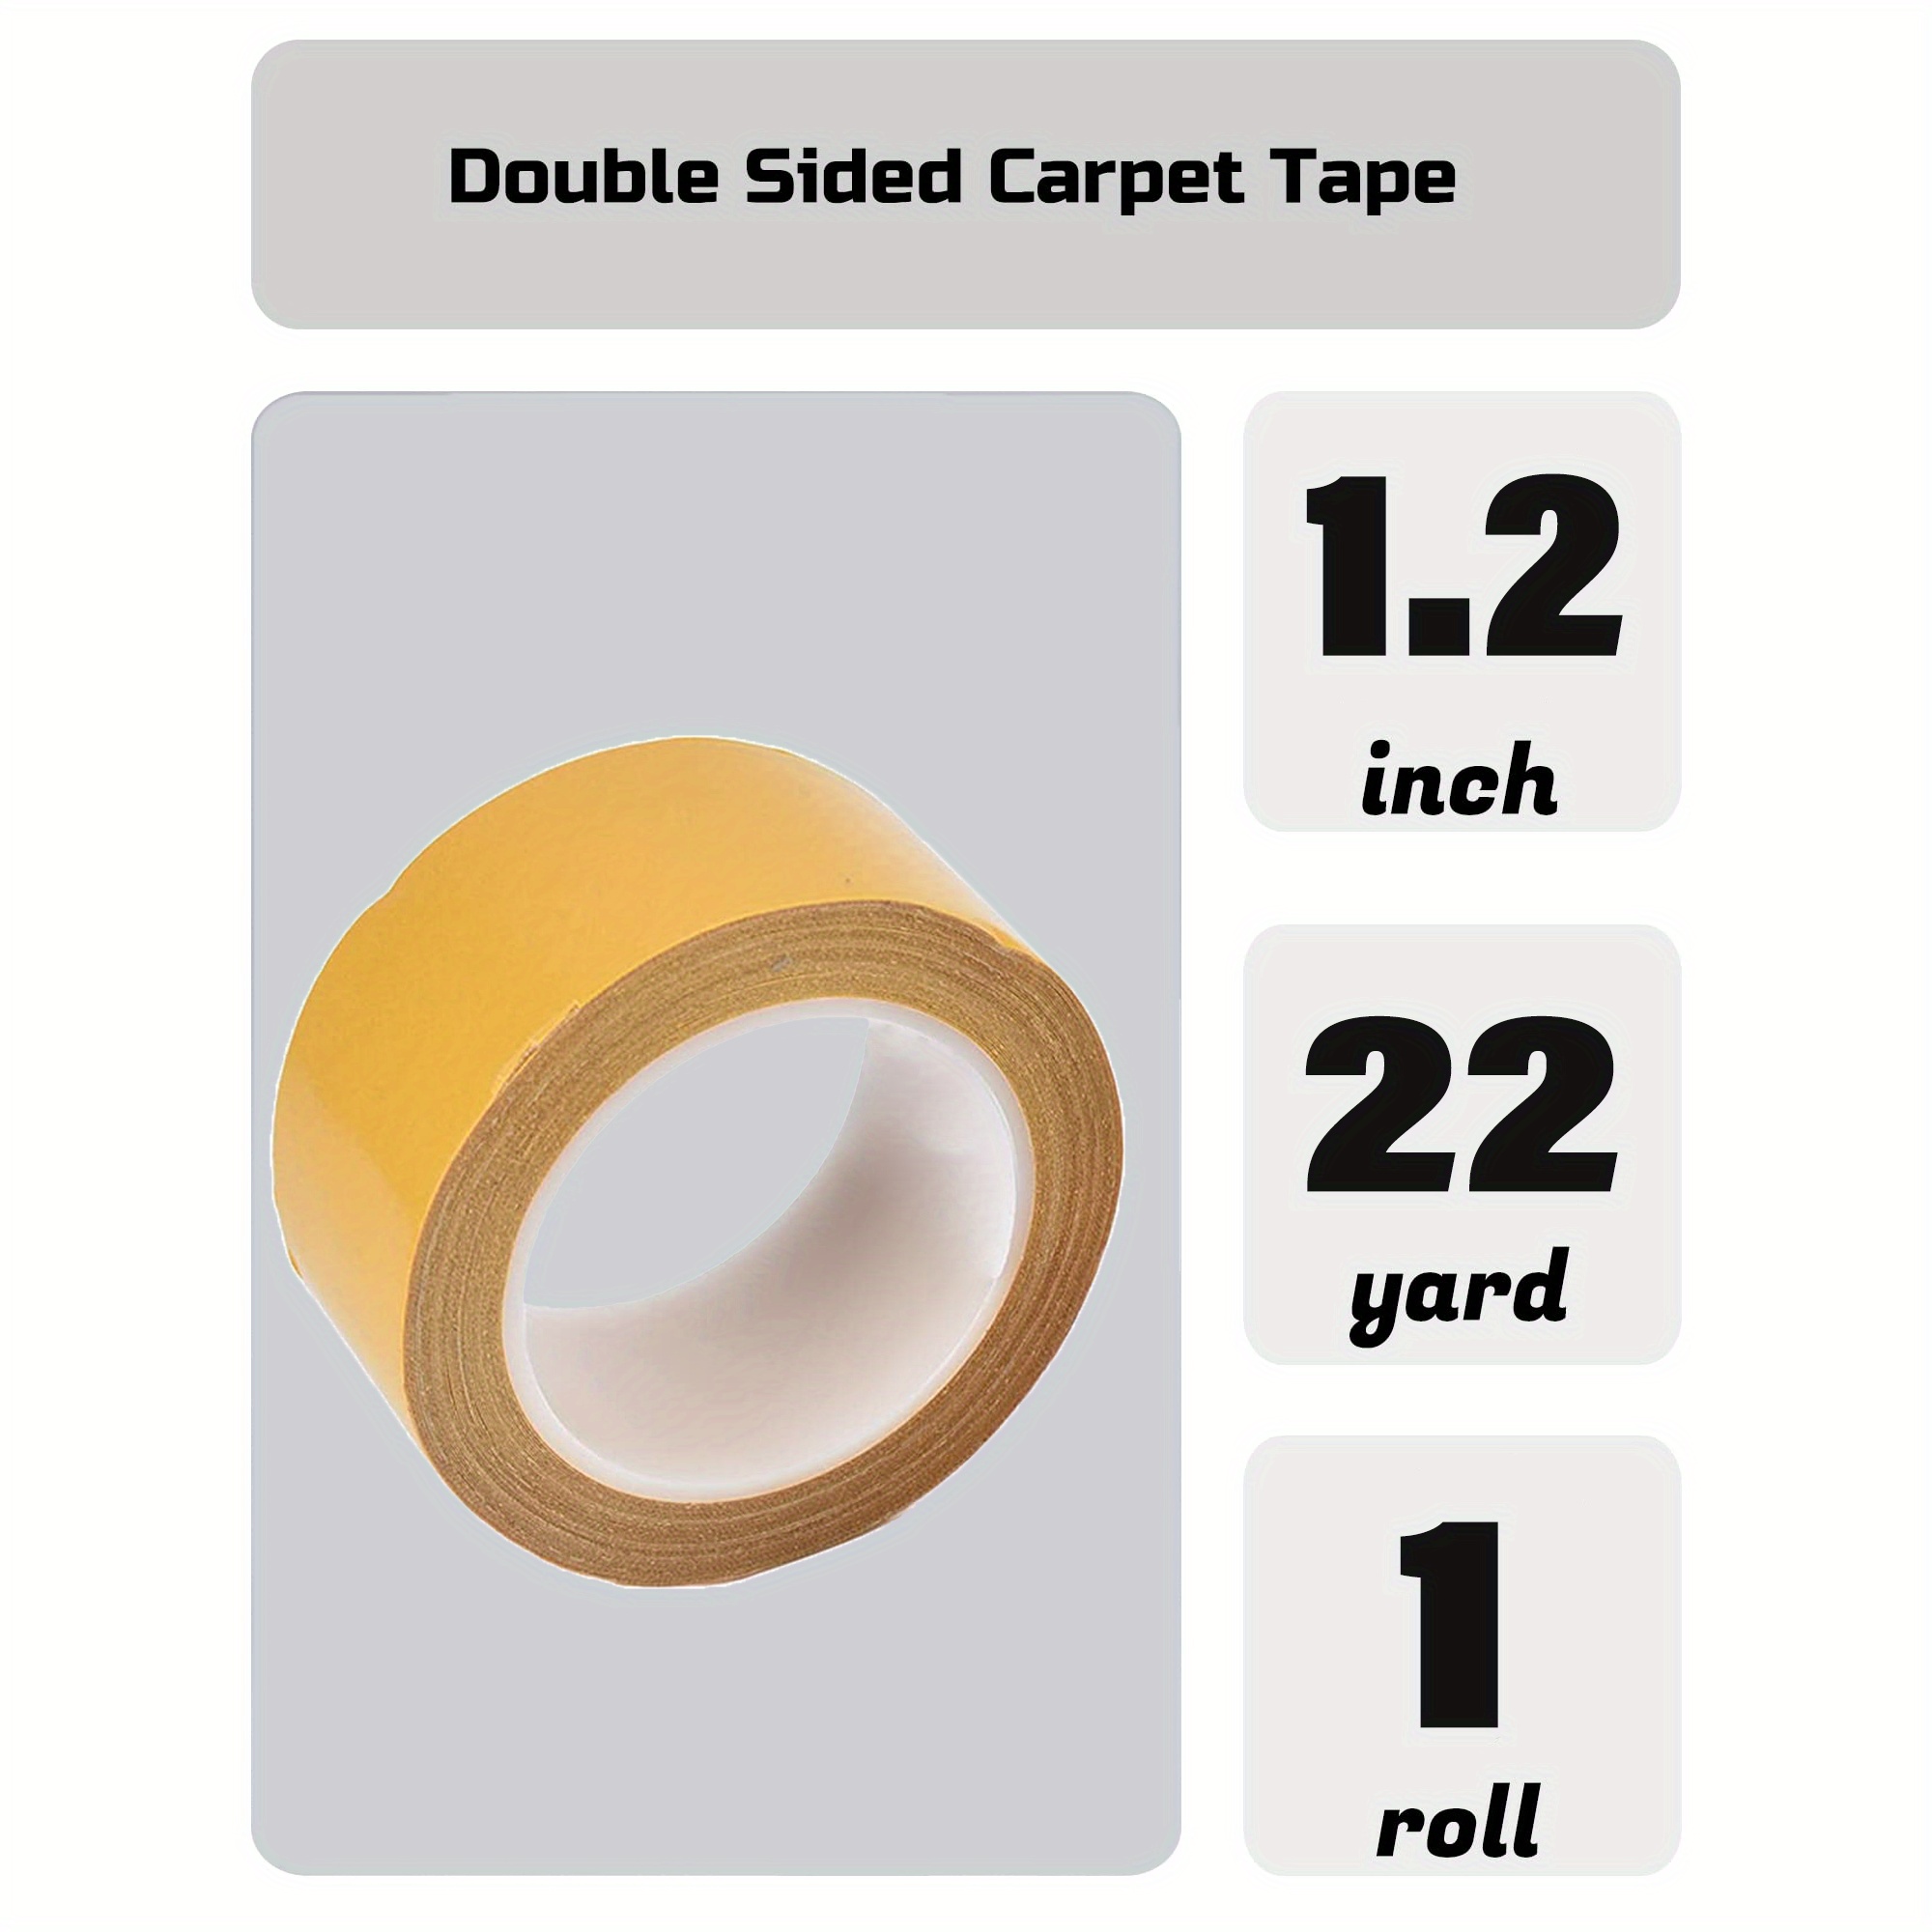 Juvale Heavy Duty Double Sided Tape for Carpet, Area Rugs, Self Adhesive for Hardwood, Tile, Indoor, and Outdoor Floors, 49 Feet